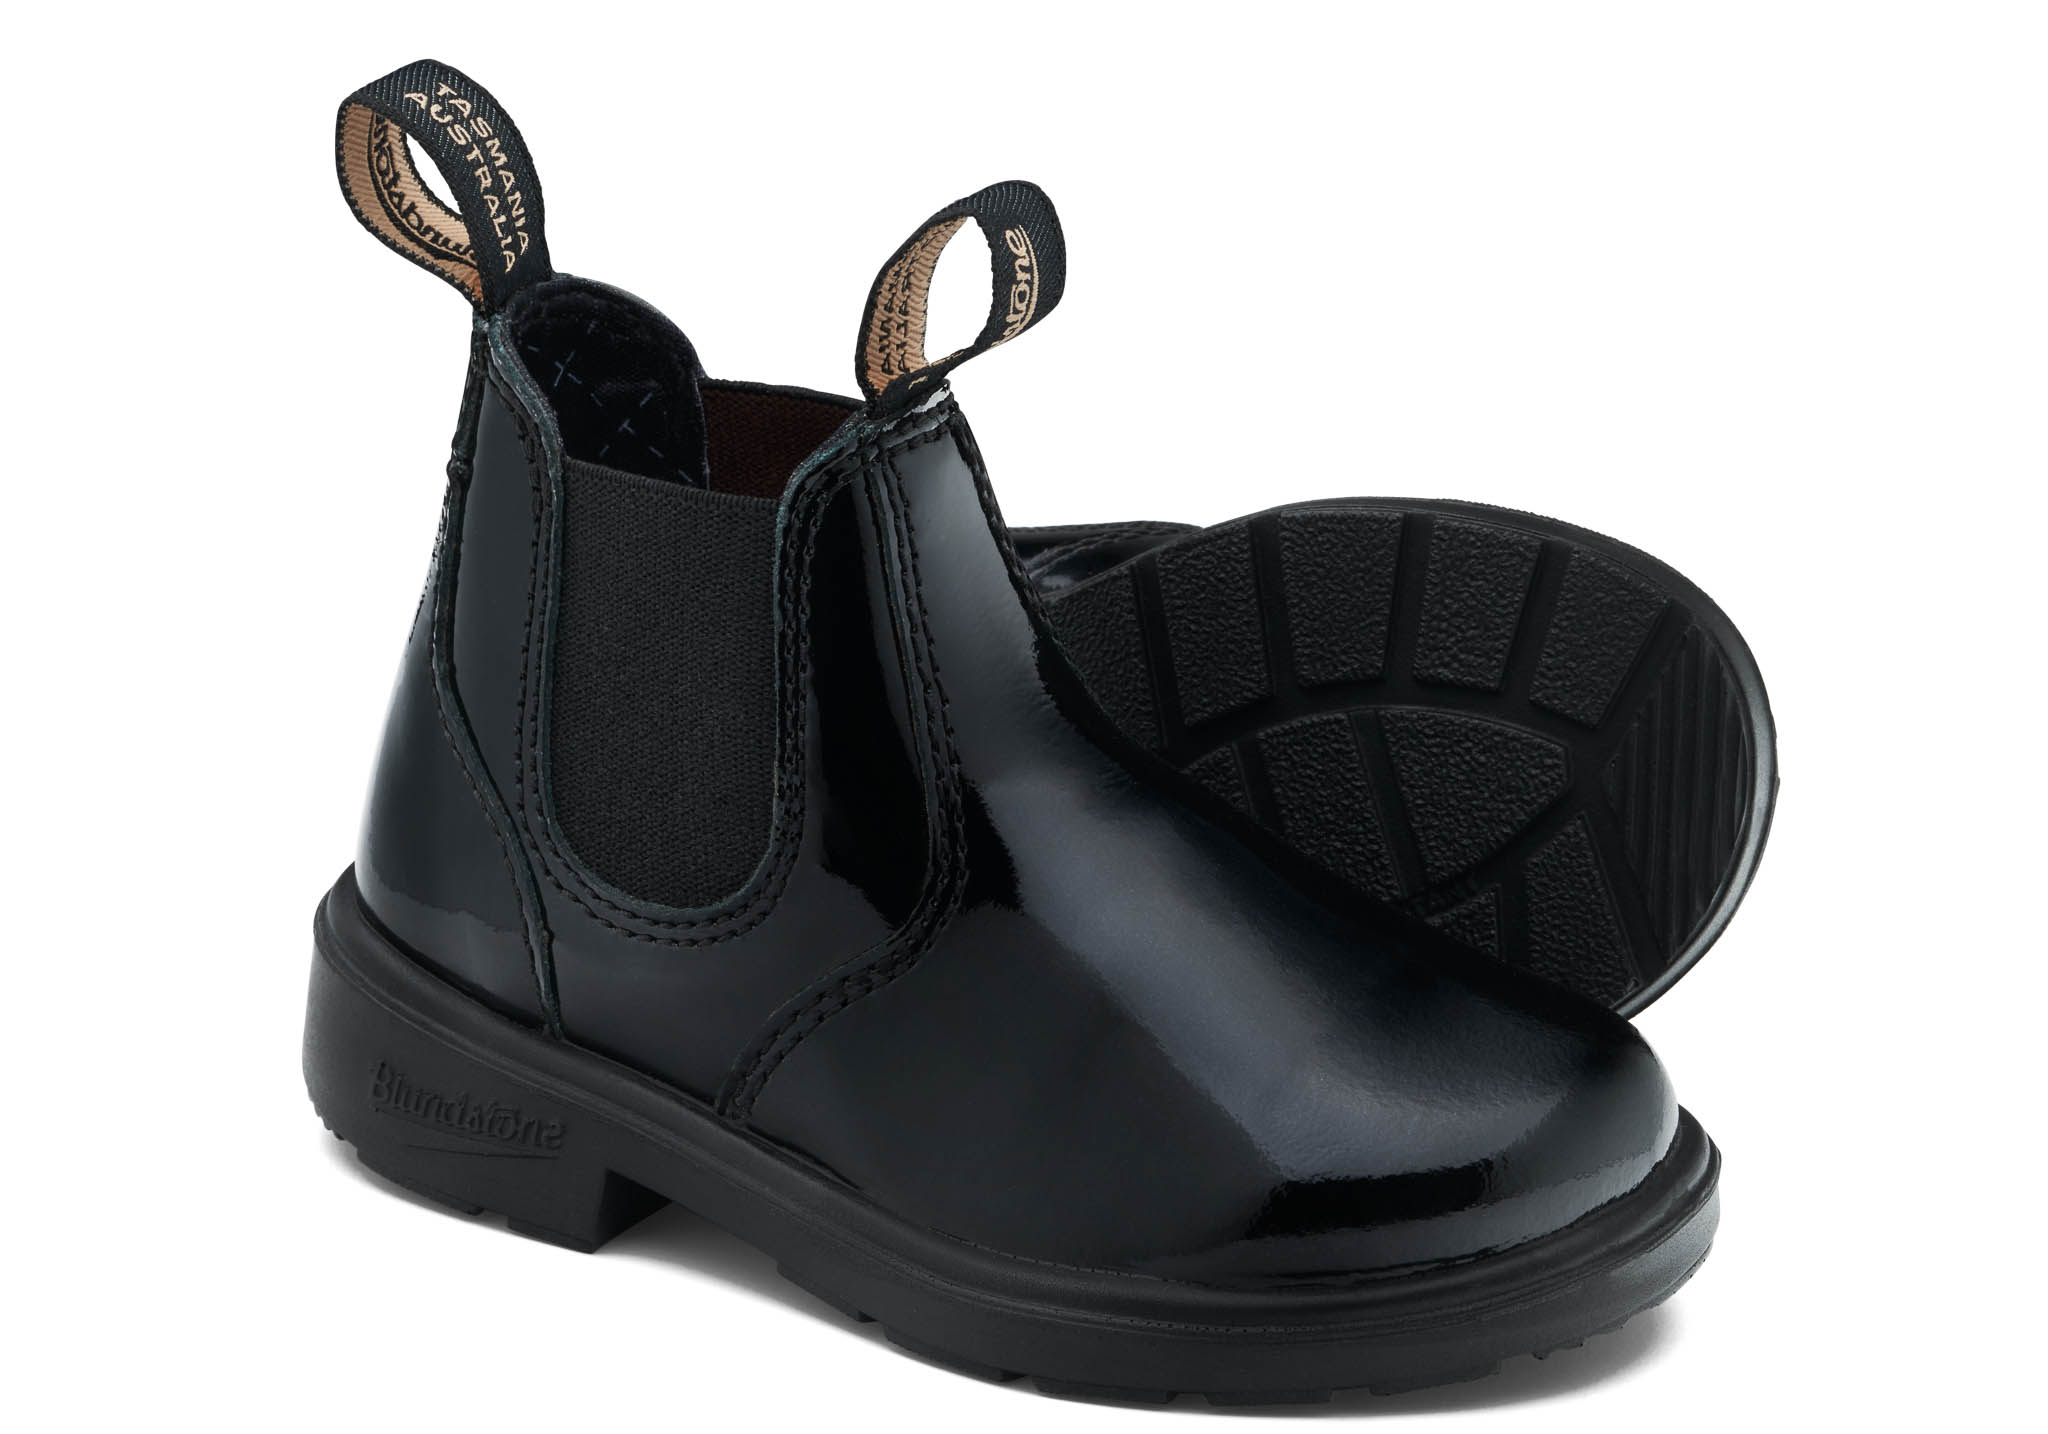 Blundstone 2255 Black Patent Patent Leather (Kids) Leather